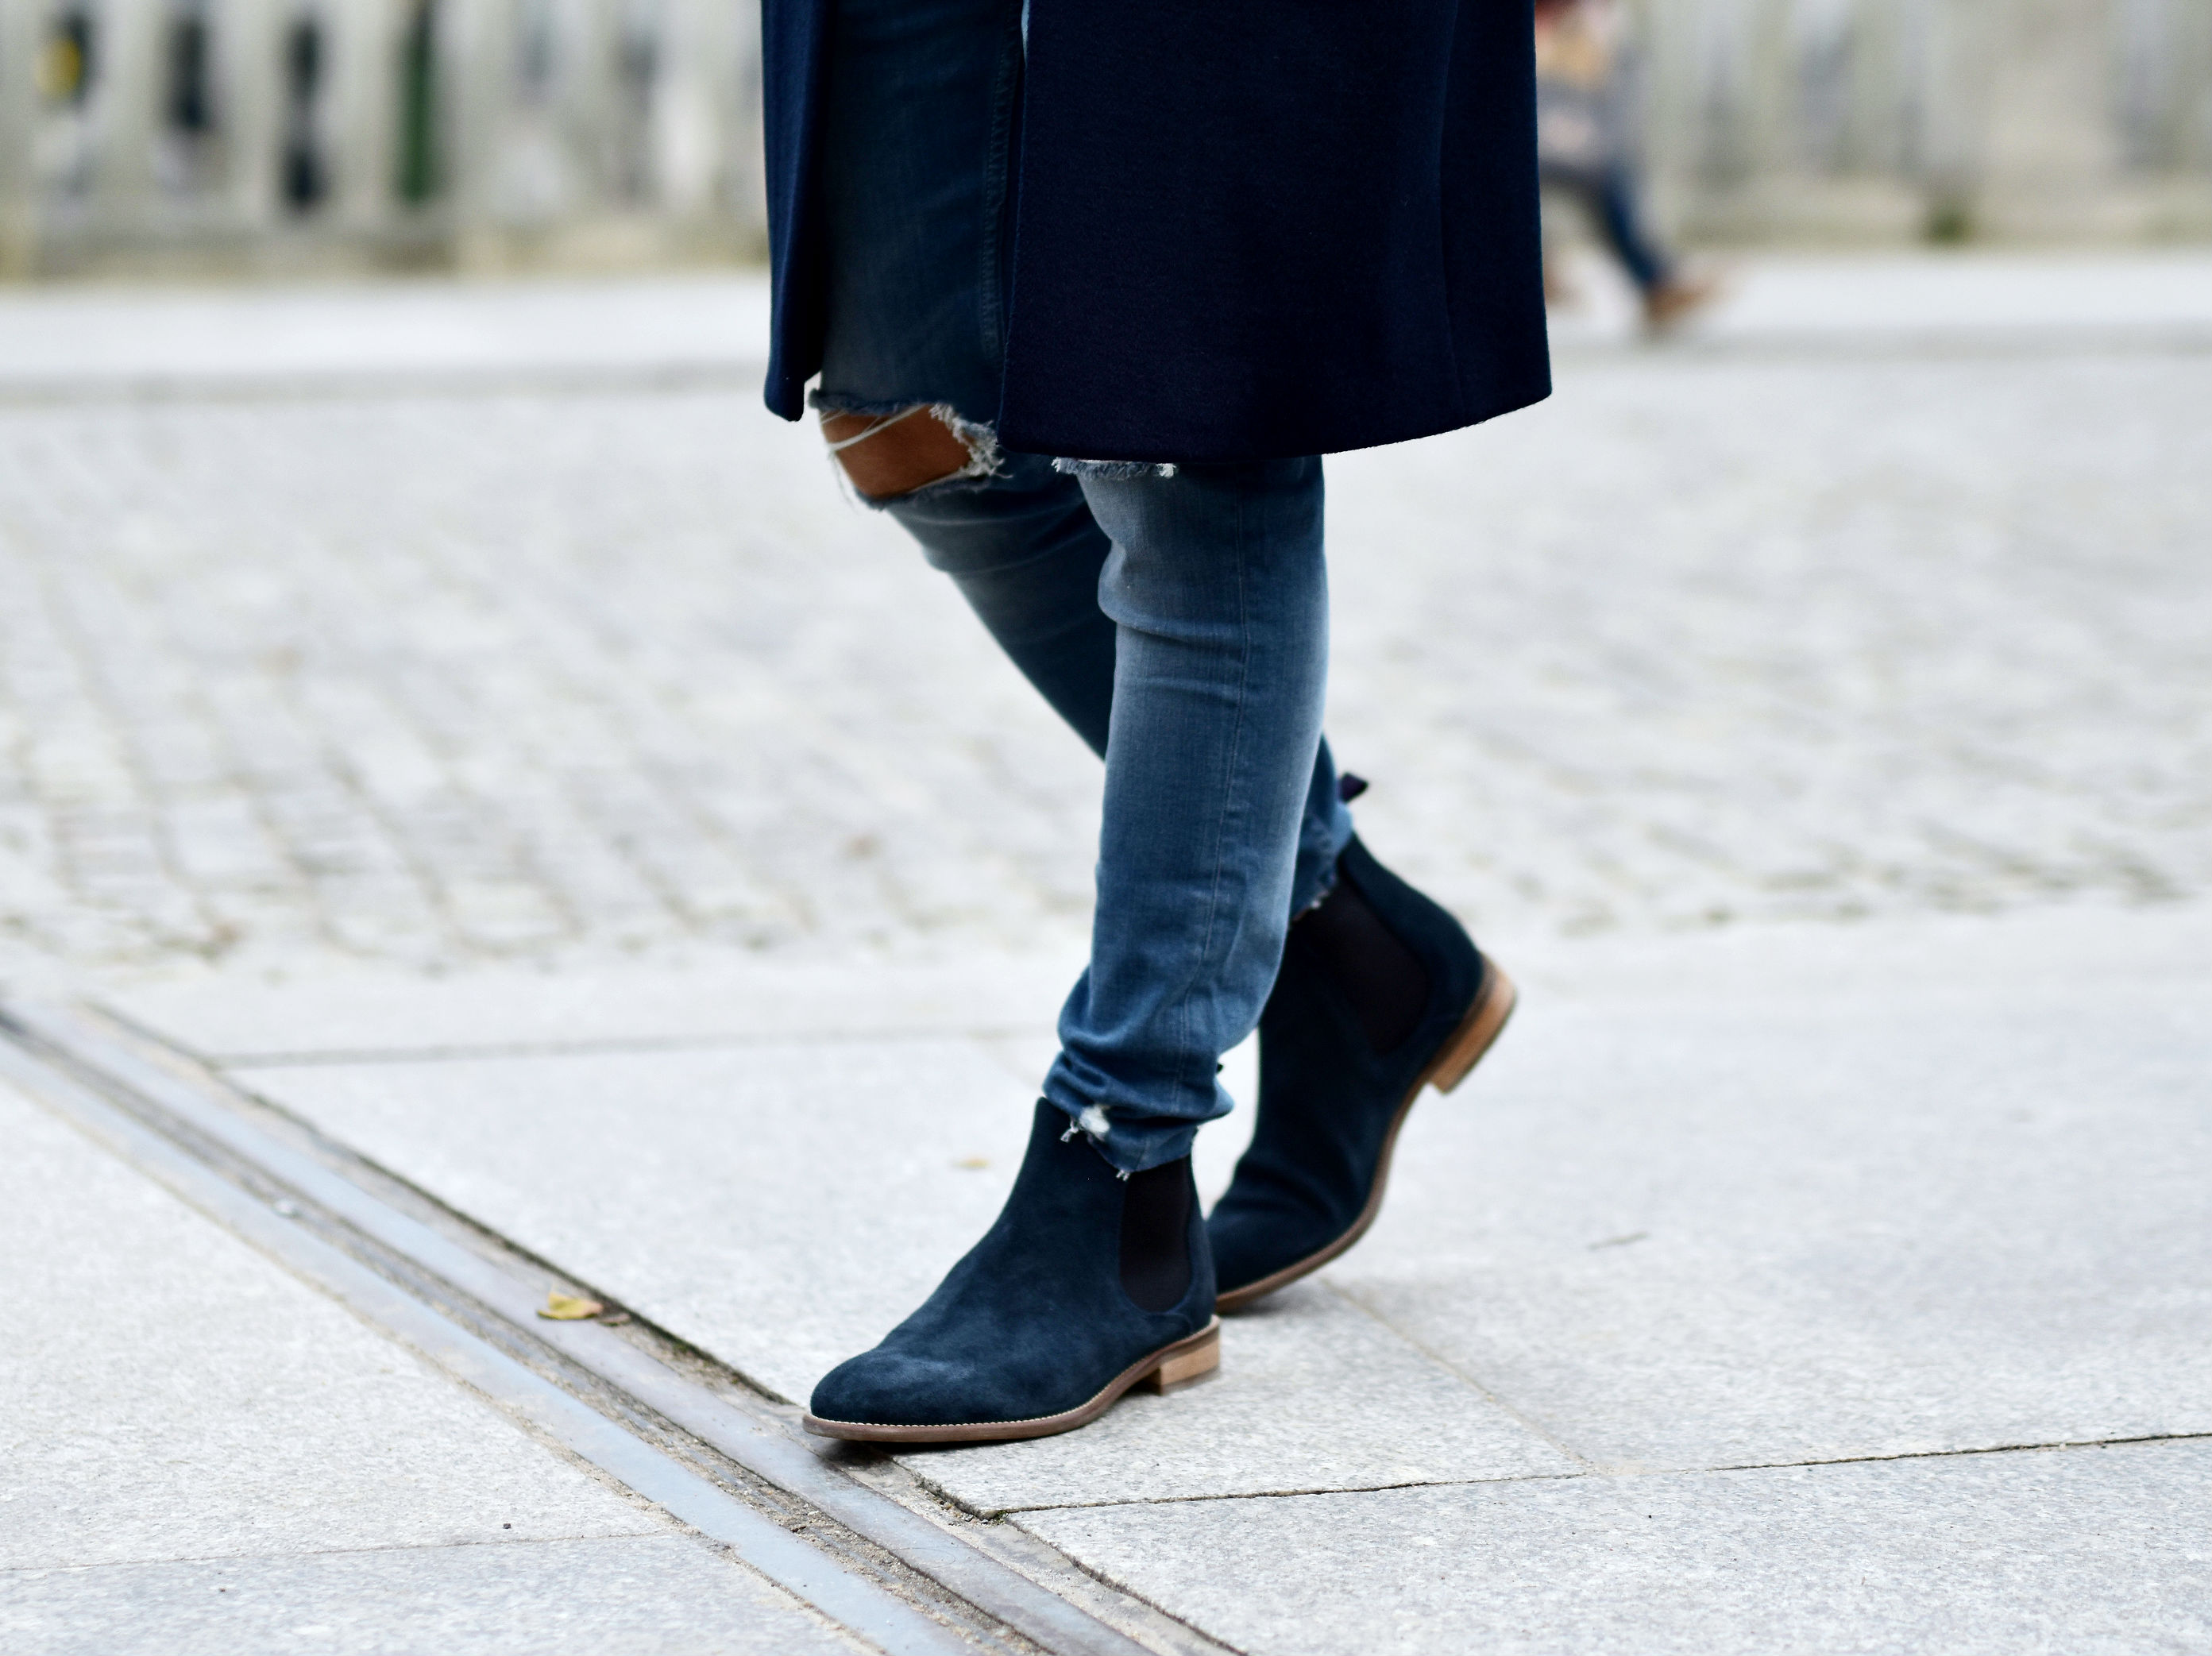 tommeezjerry-styleblog-maennerblog-maenner-modeblog-berlin-berlinblog-maennermodeblog-outfit-mantel-marks-and-spencer-coat-chelsea-boots-autumn-look-7